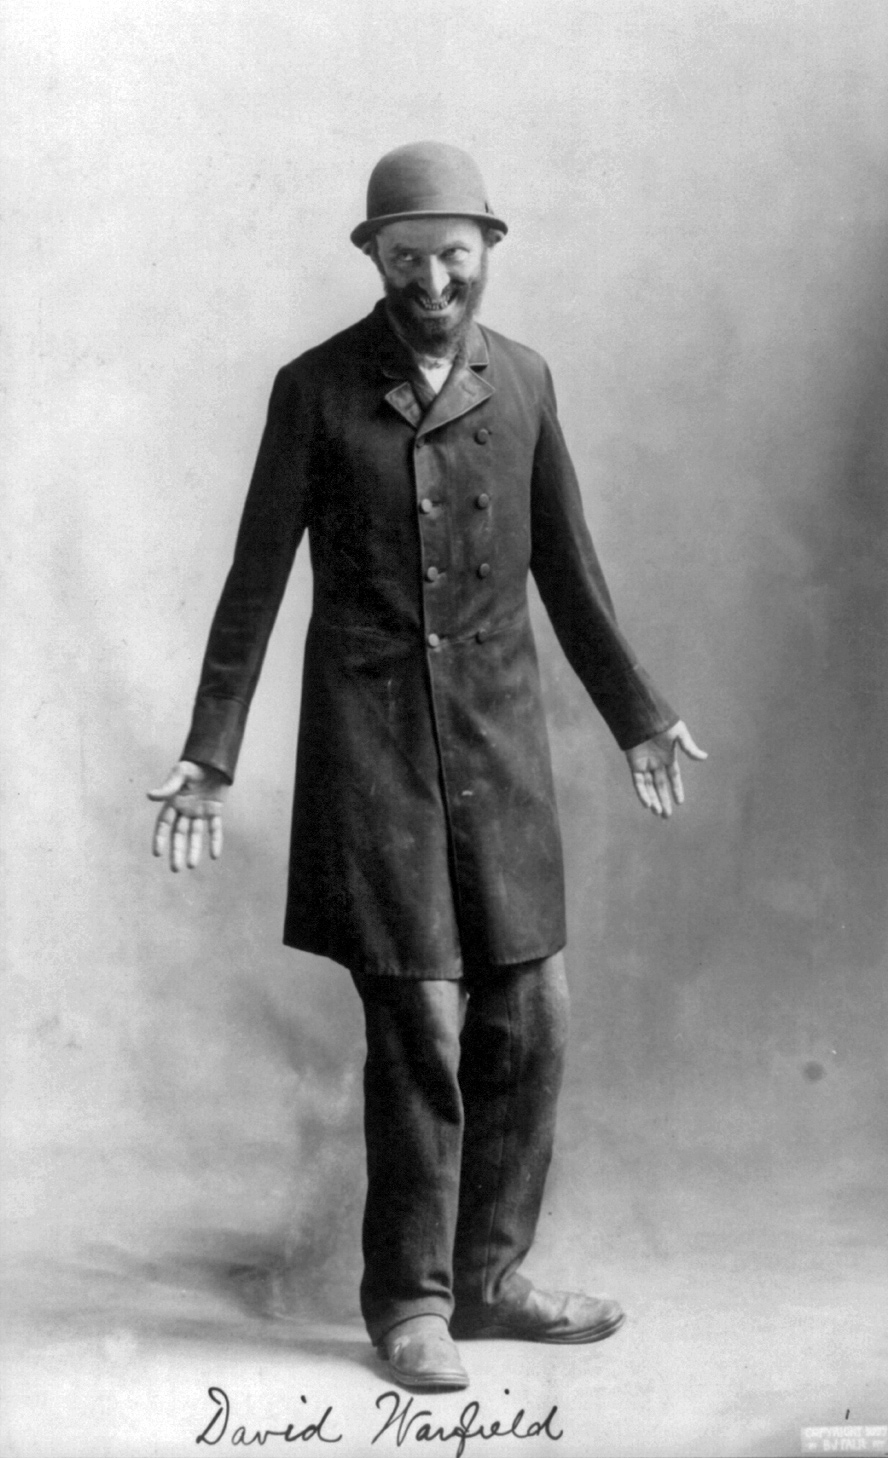 Character actor David Warfield dressed as a tramp. Photograph by B.J. Falk, c. 1897. View full size.